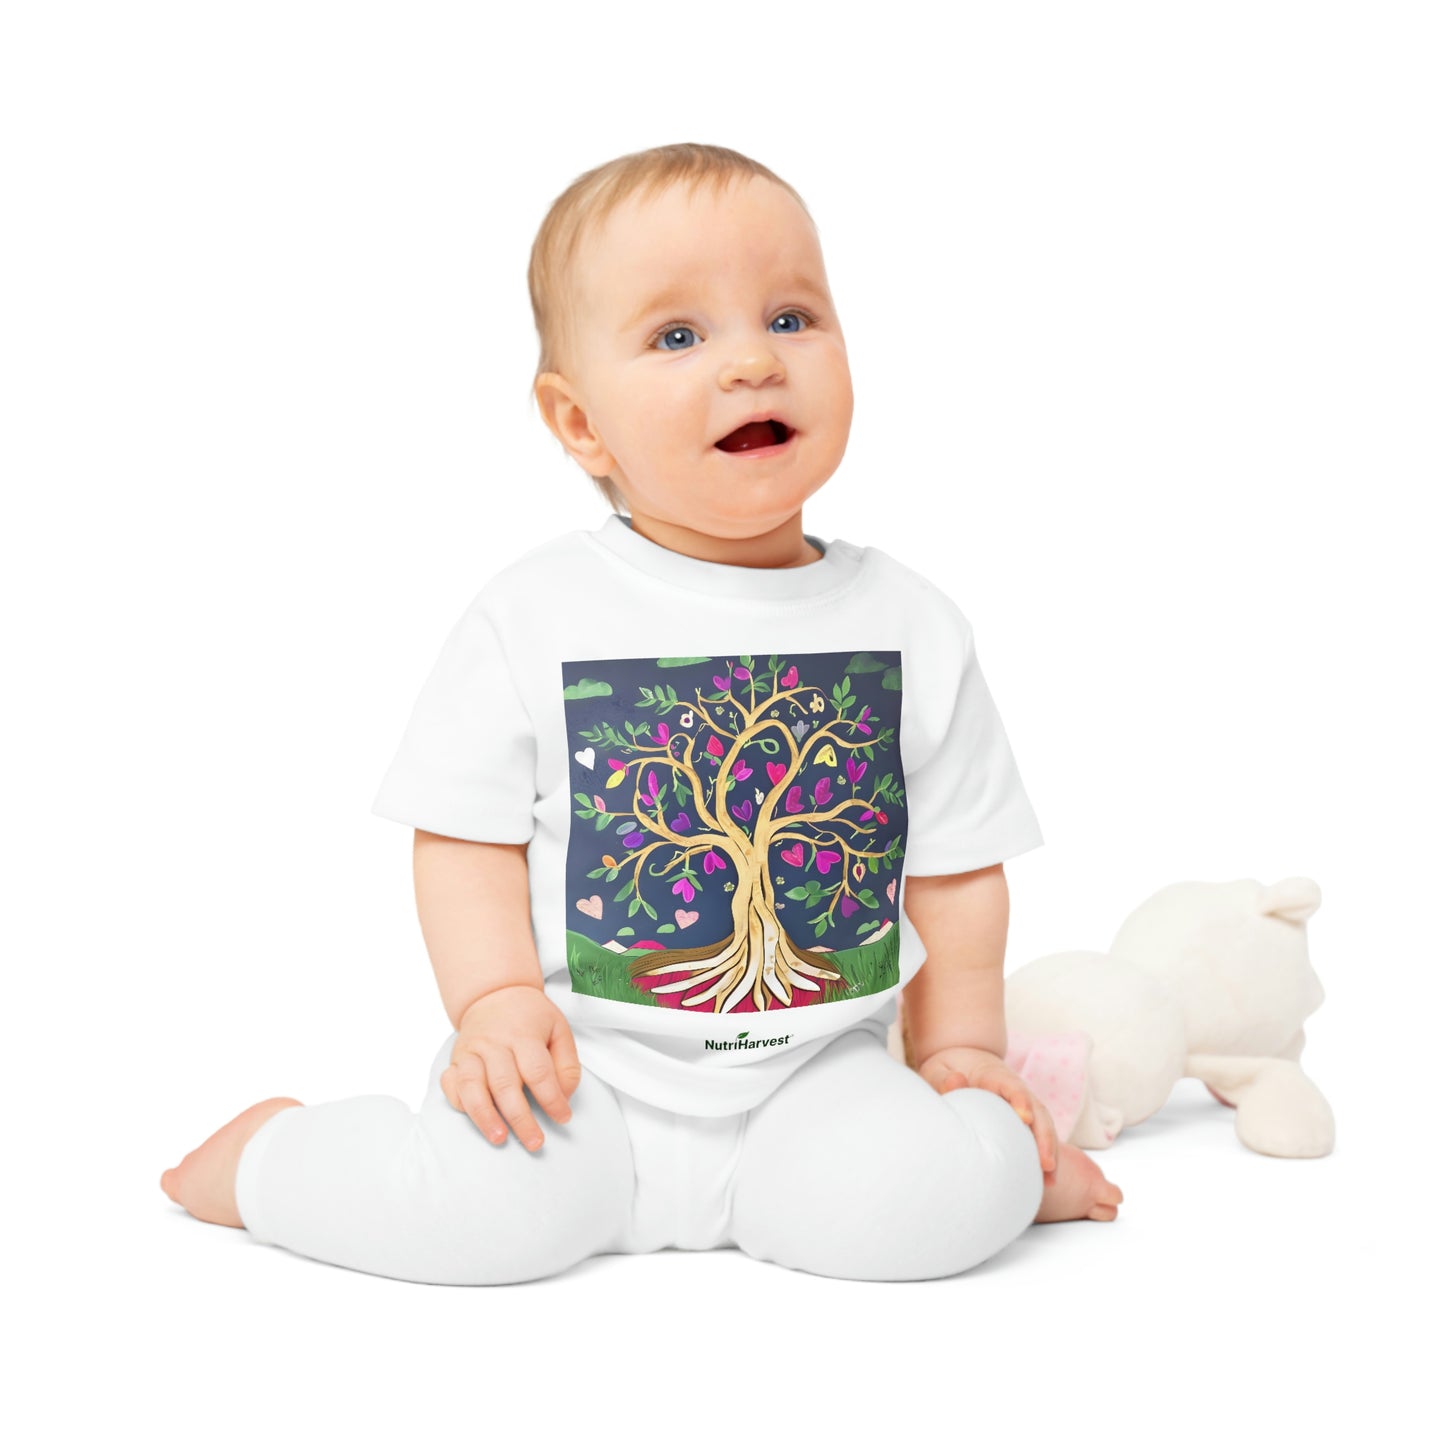 Organic Baby T-Shirt in Blue, White, Pink, Black, and Navy